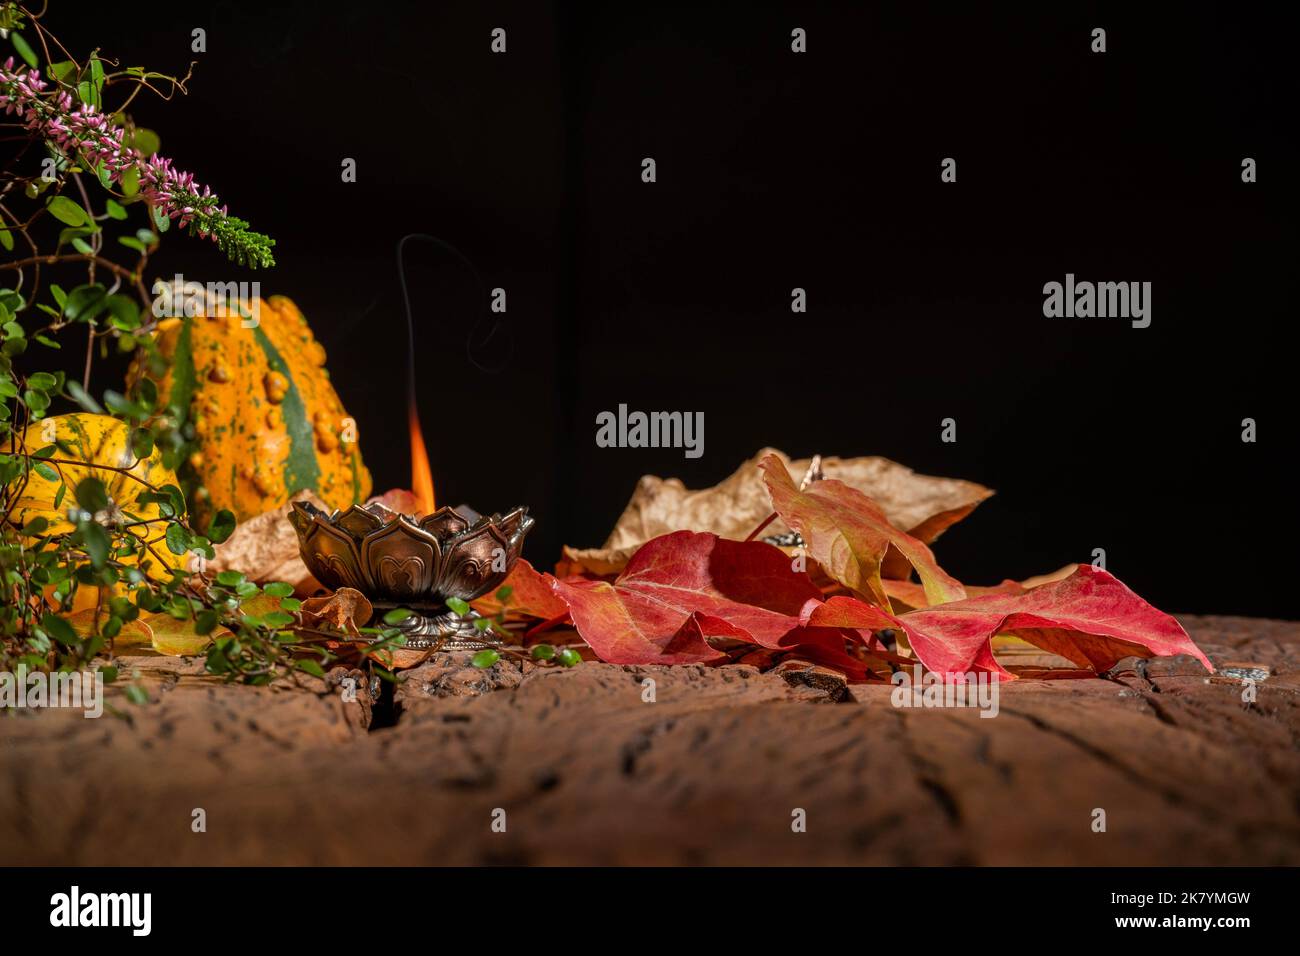 Background with pumpkins, dry leaves, incense, wood to simulate spiritual atmosphere. Stock Photo